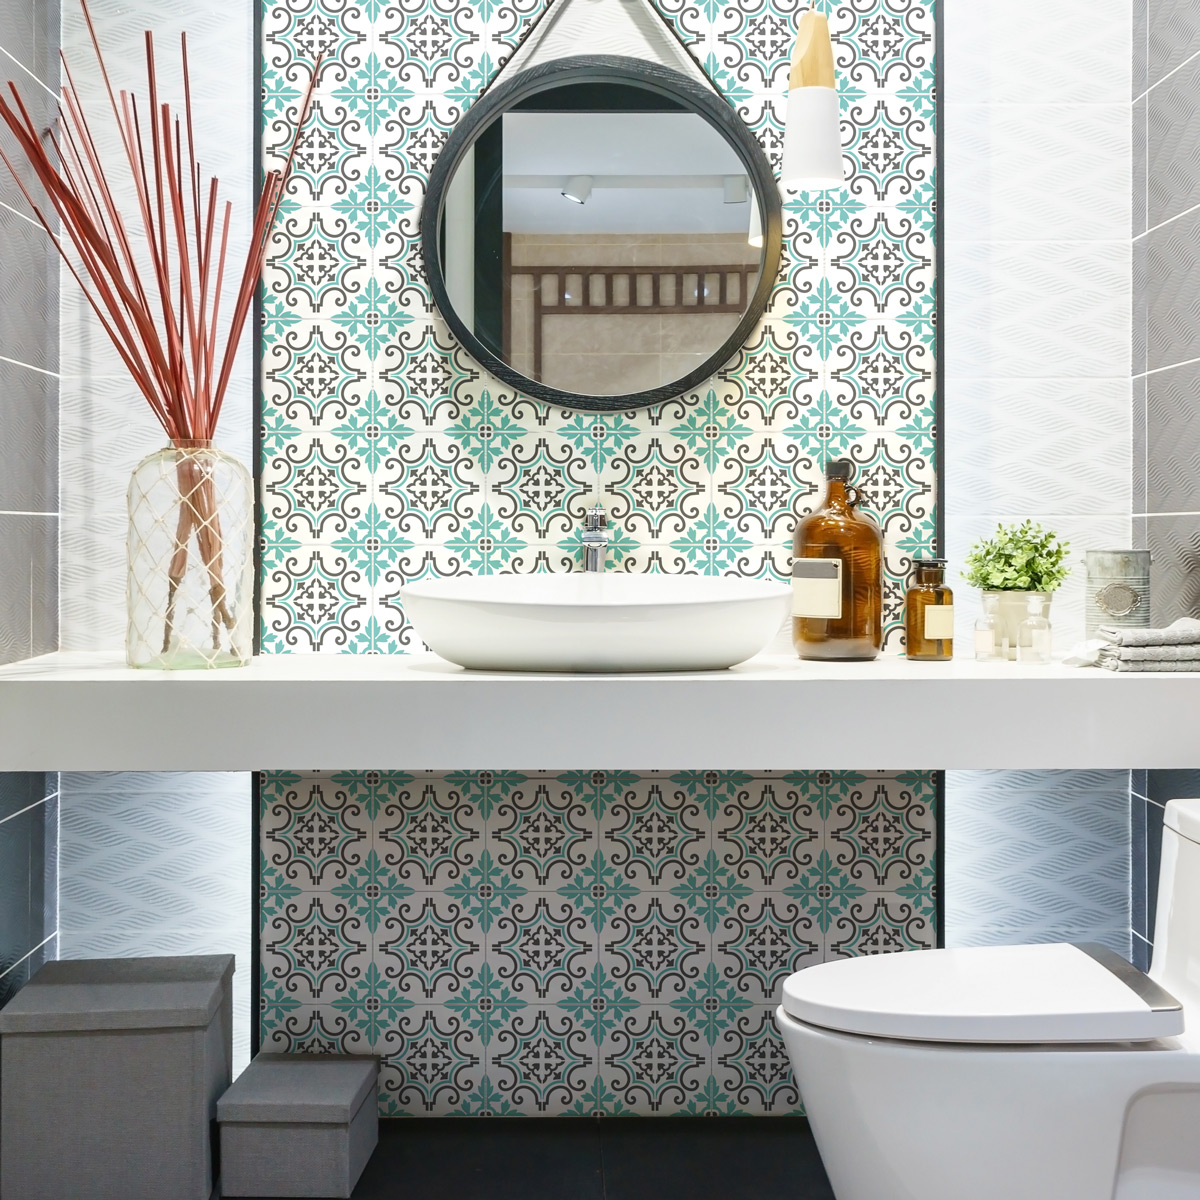 60 wall stickers cement tiles azulejos Paco